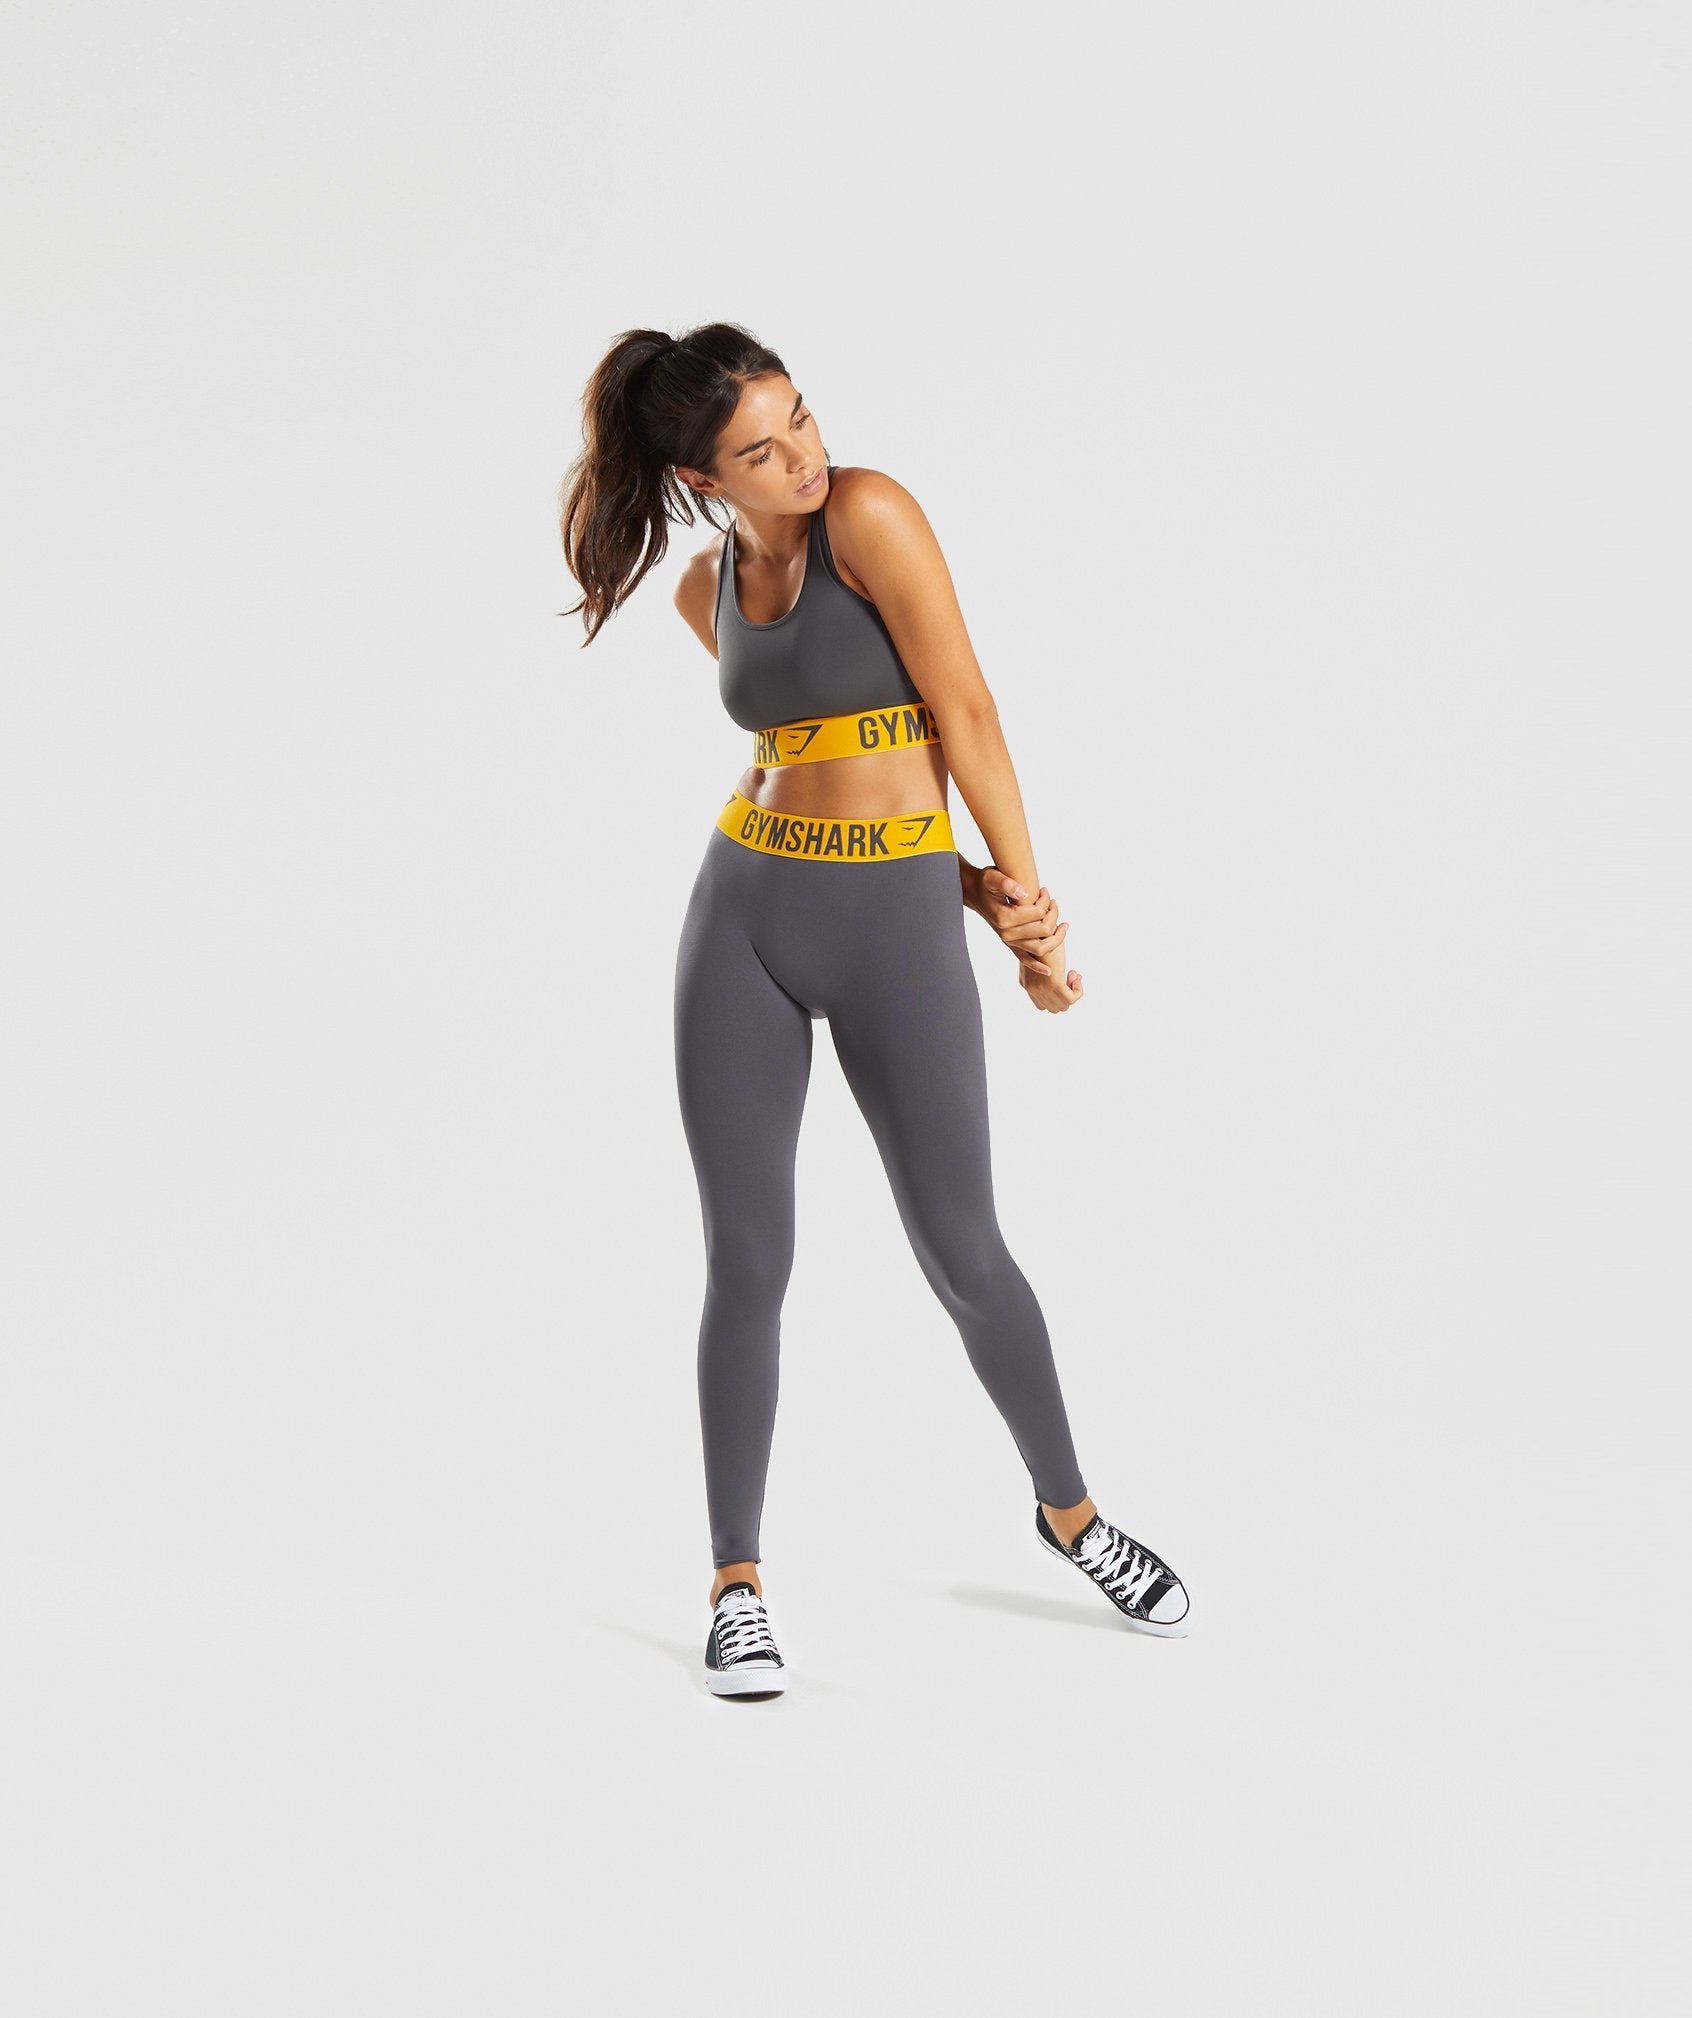 Fit Seamless Leggings in Charcoal/Citrus Yellow - view 5